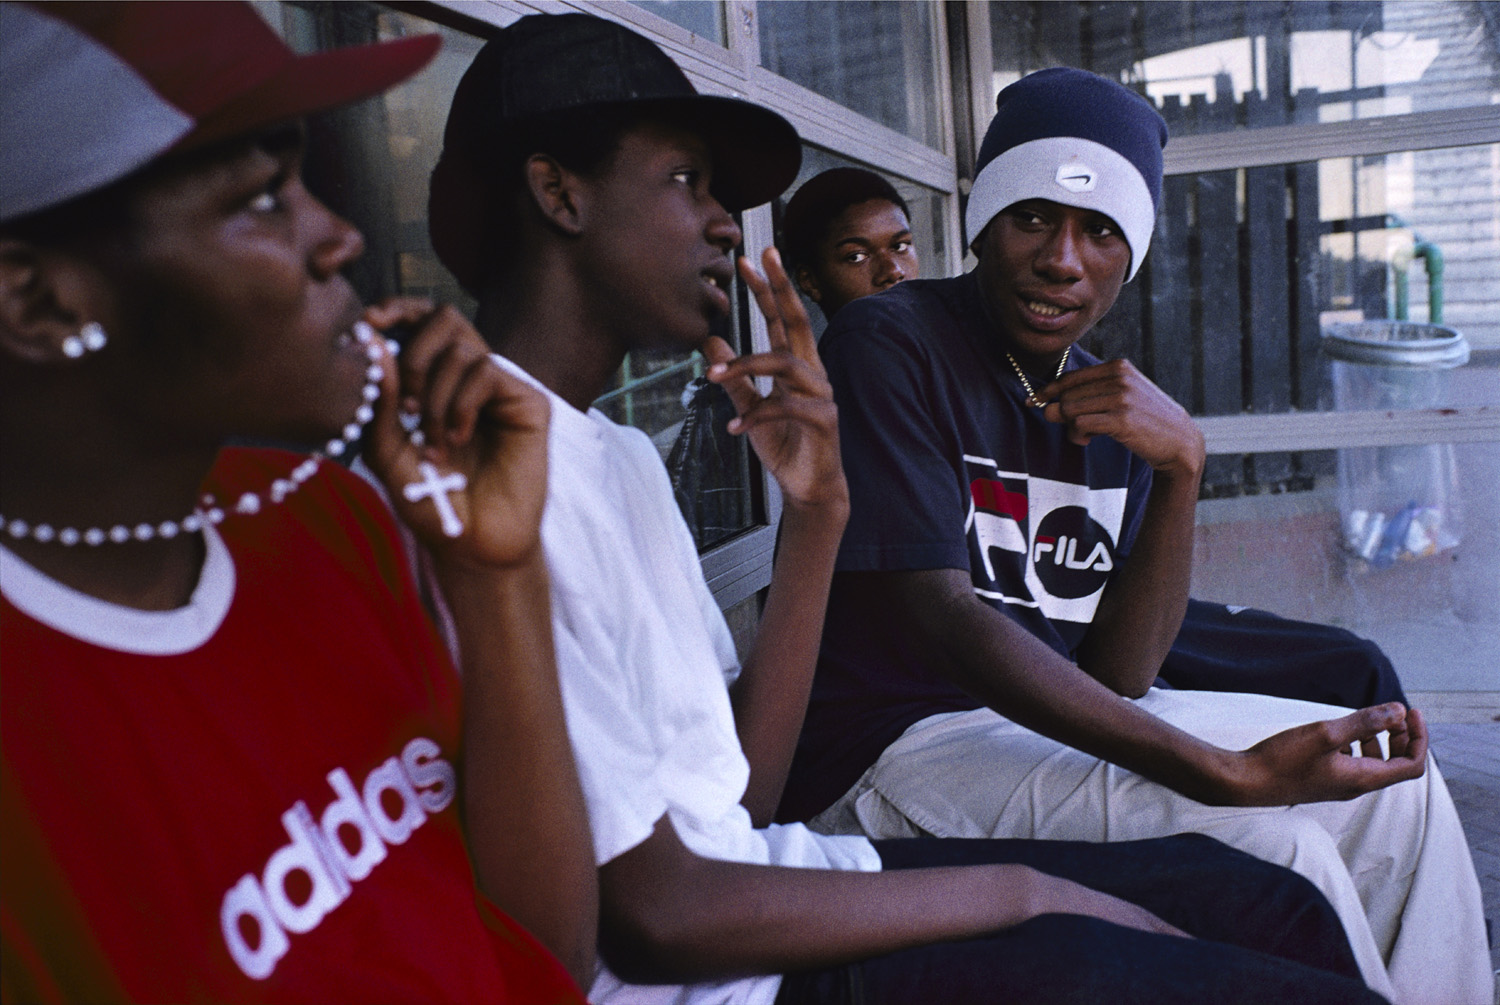 A group of young men in casual attire, including baseball caps and sportswear, sit and chat on seats at a train station, embodying youth culture.